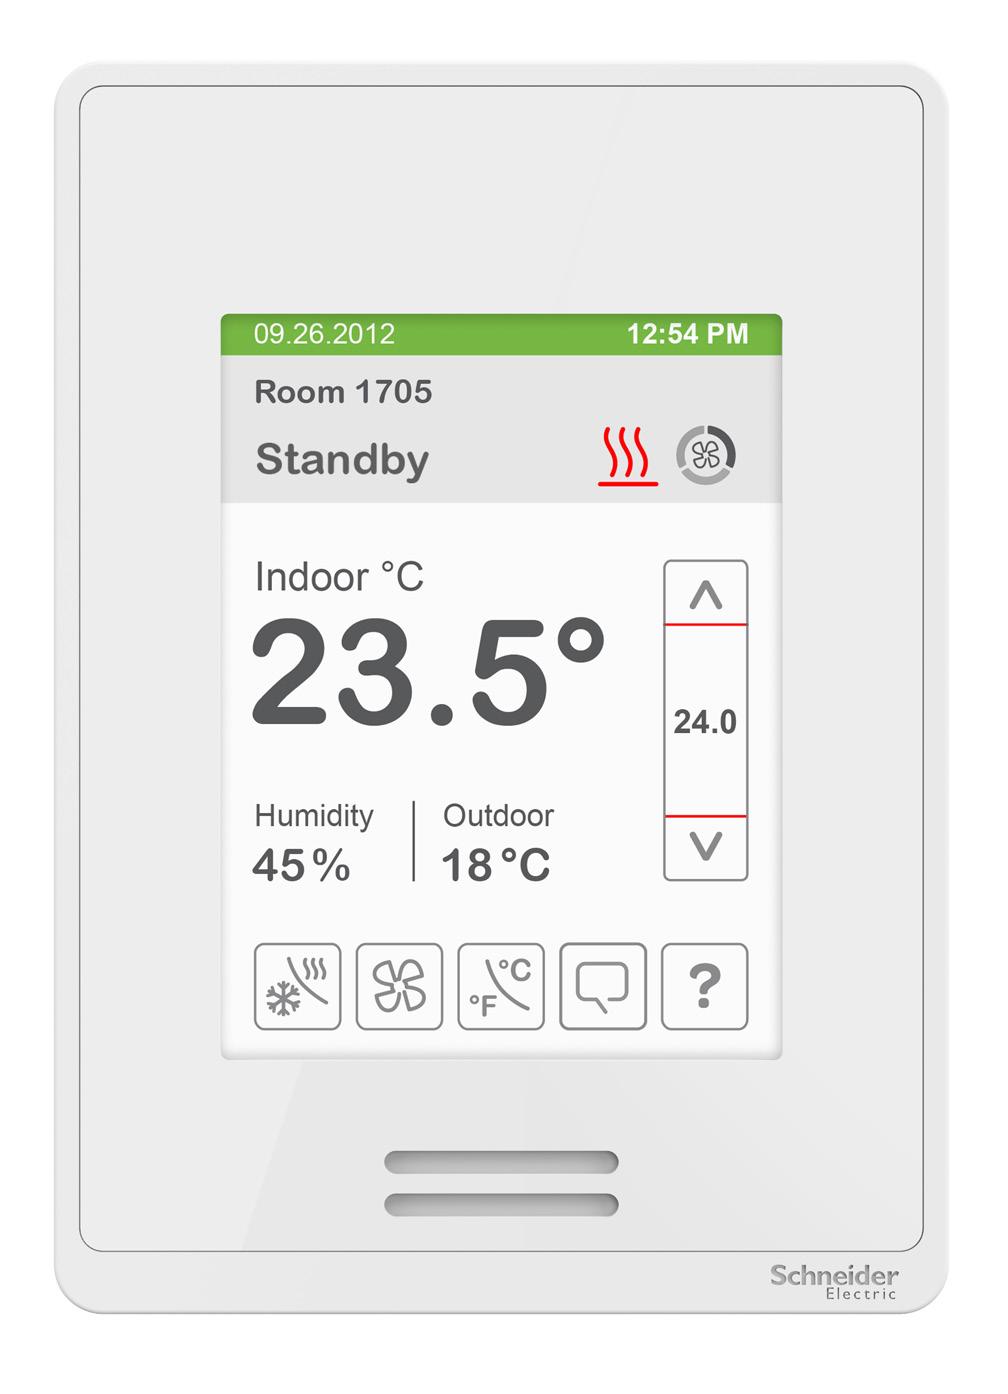 5 HOME SCREEN DISPLAY Hospitality User Interface Shown Date Short Network Message Occupancy Status Time System Status Fan Status Room Indoor Temperature Room Indoor Humidity Outdoor Temperature Up